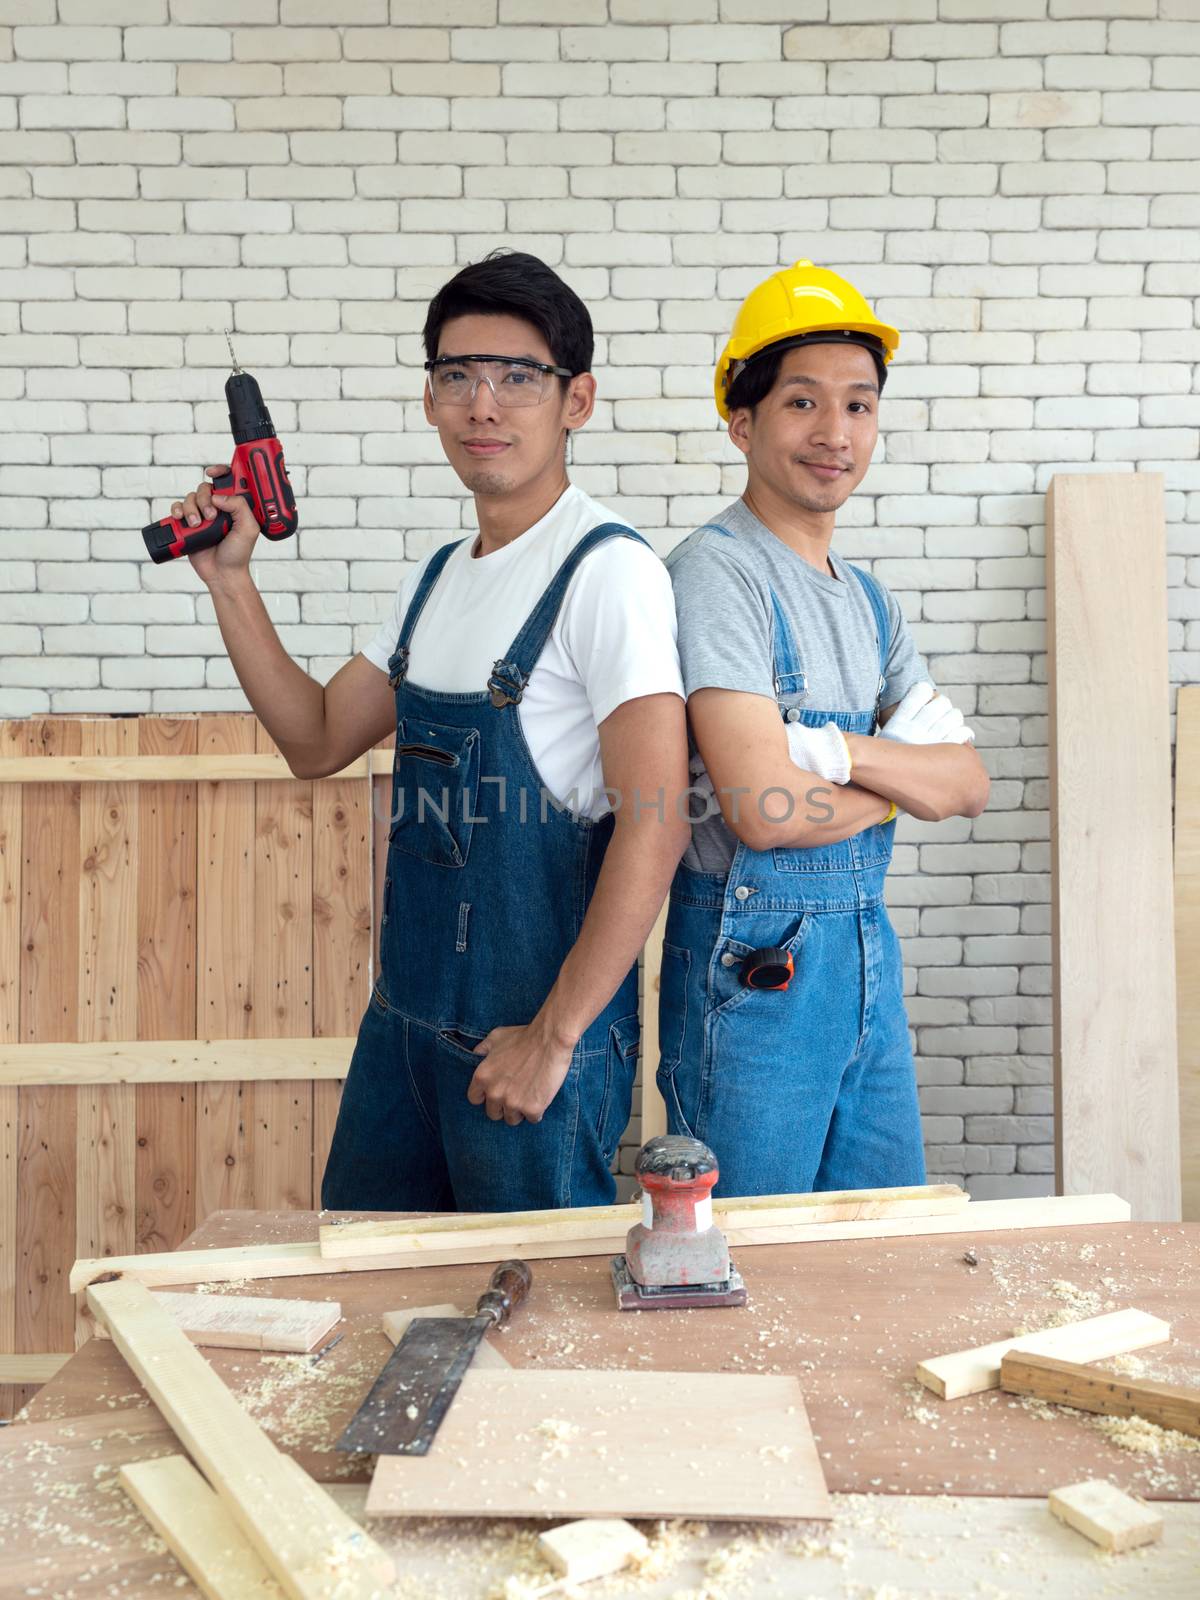 Two Asian carpentry poses confidently before beginning the job of receiving orders at the wood working place. Morning work atmosphere in the workshop room. A desk full of hand tools and wood piles.